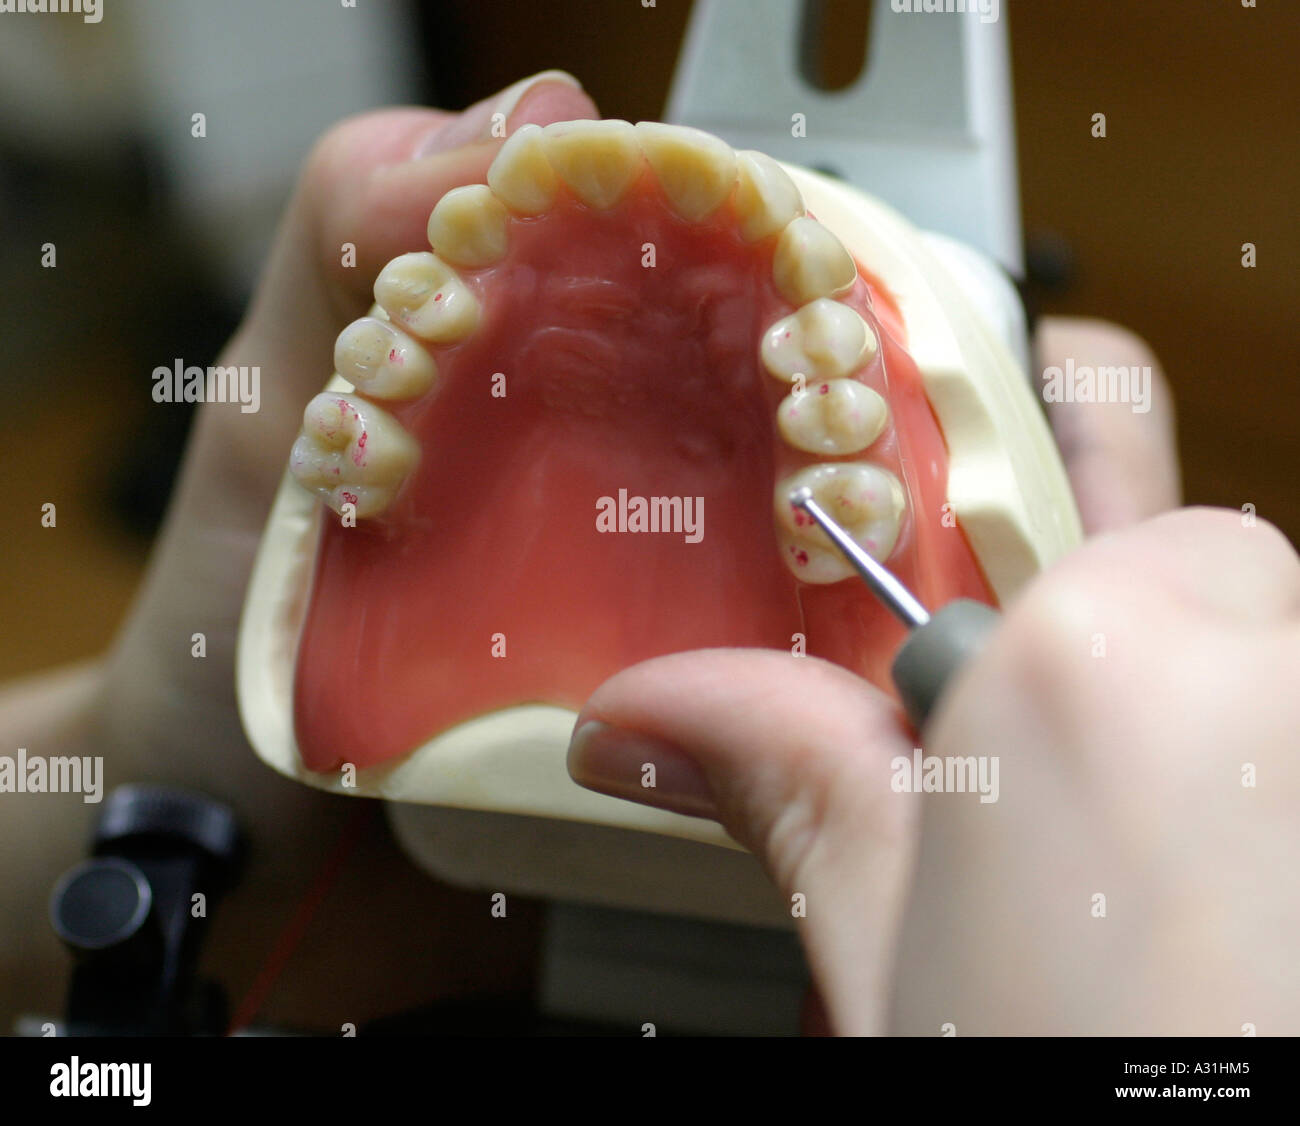 Technician polishing dentures close up elevated view Stock Photo